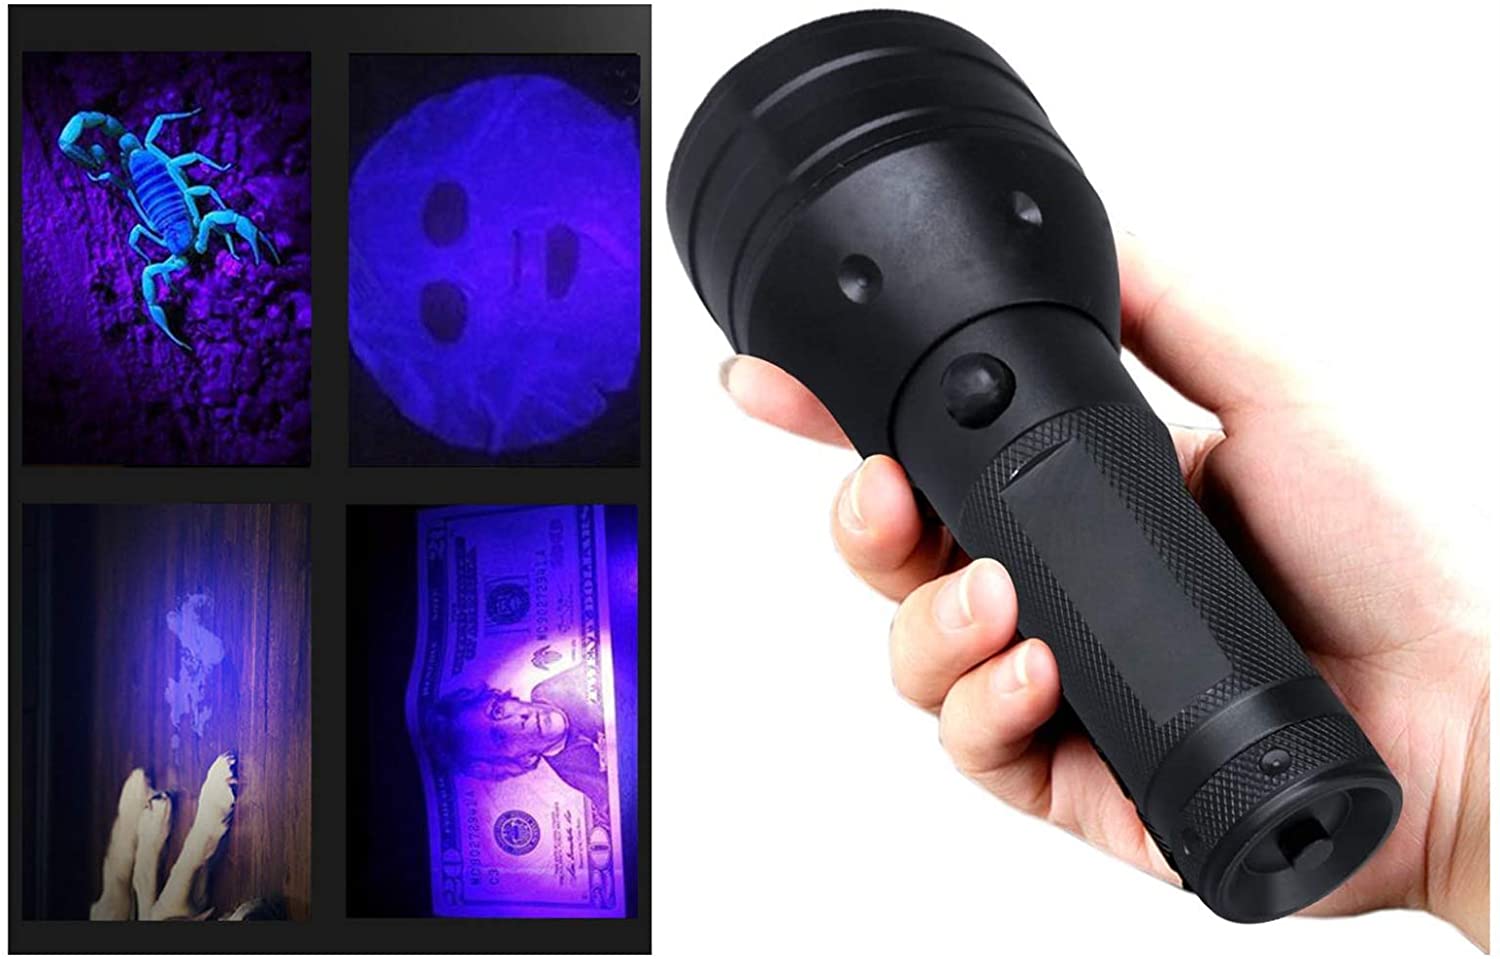 UV Flashlight 51 LED 395 Nm Ultraviolet Blacklight Pet Urine Detector Dry Stains and Bed Bugs Detector